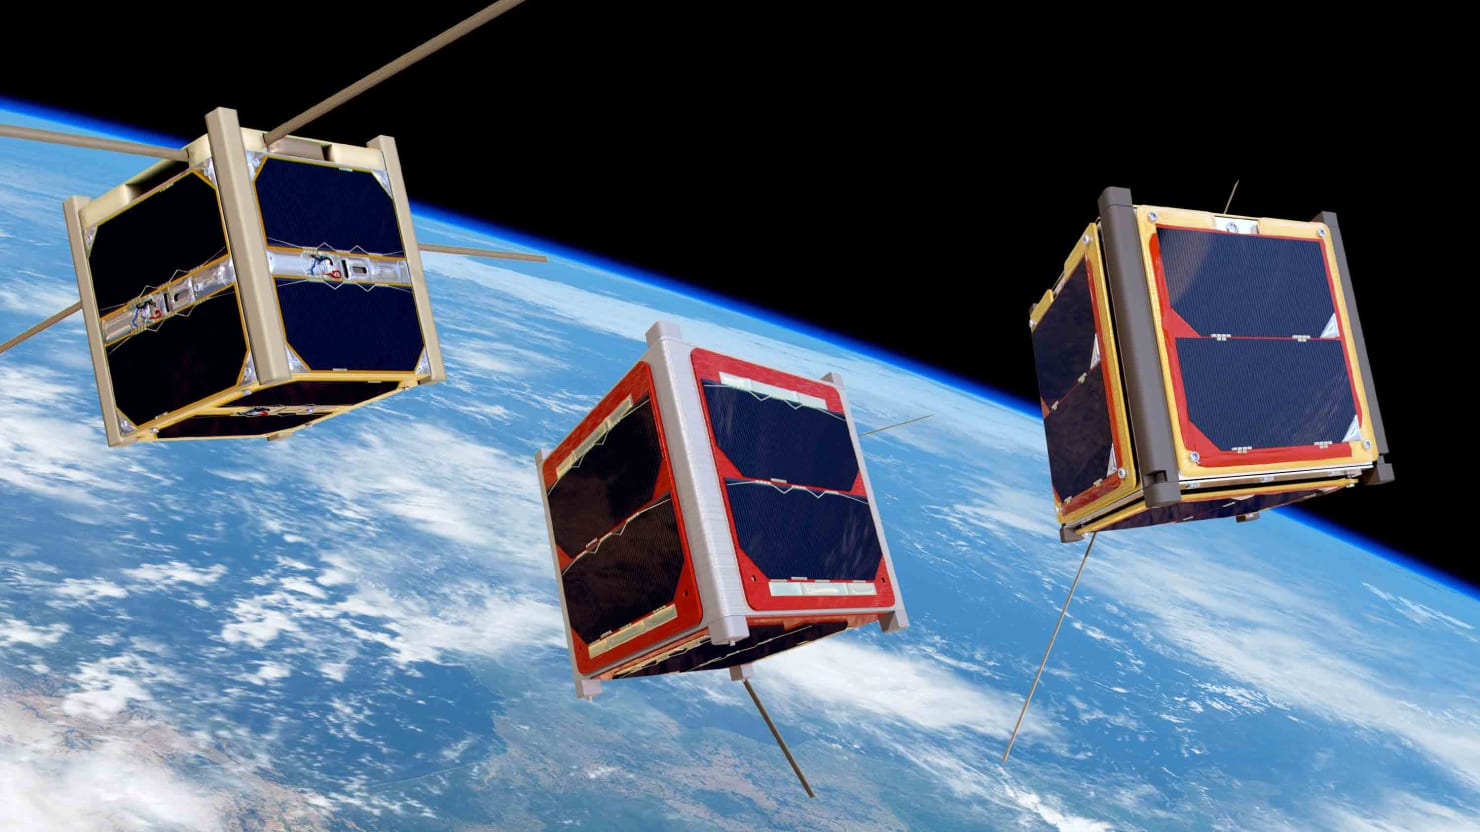 A Swarm of Shoebox Satellites In the Sky Will Predict the Next Natural